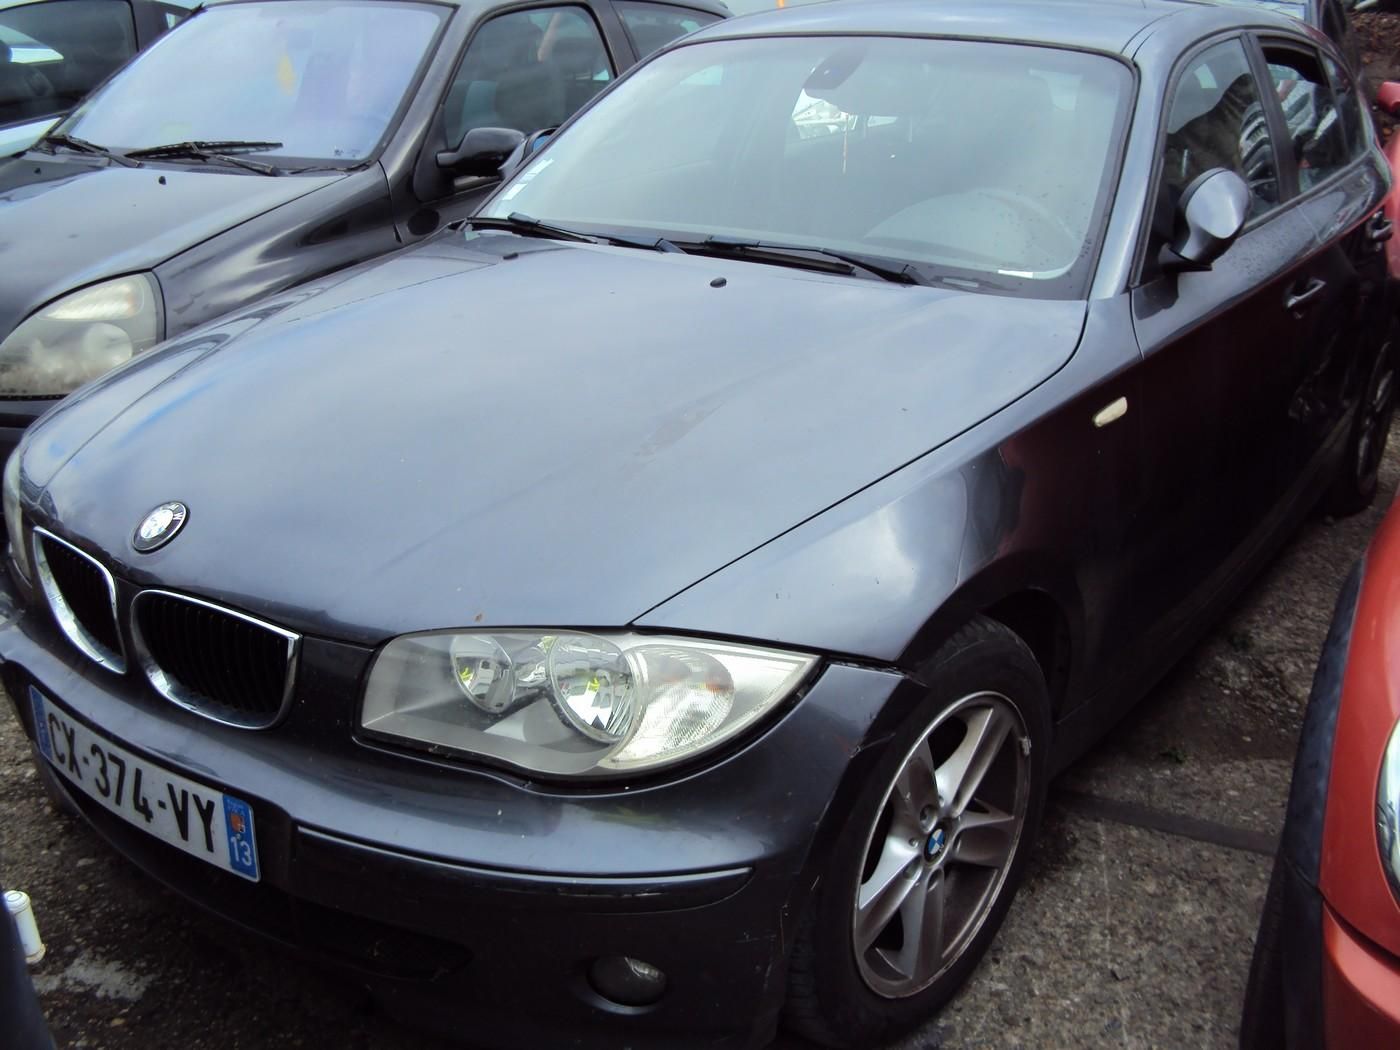 Null [RP][ACI] 
	
For professionals only

	 BMW 1 Series Diesel, imm. CX-374-VY,&hellip;